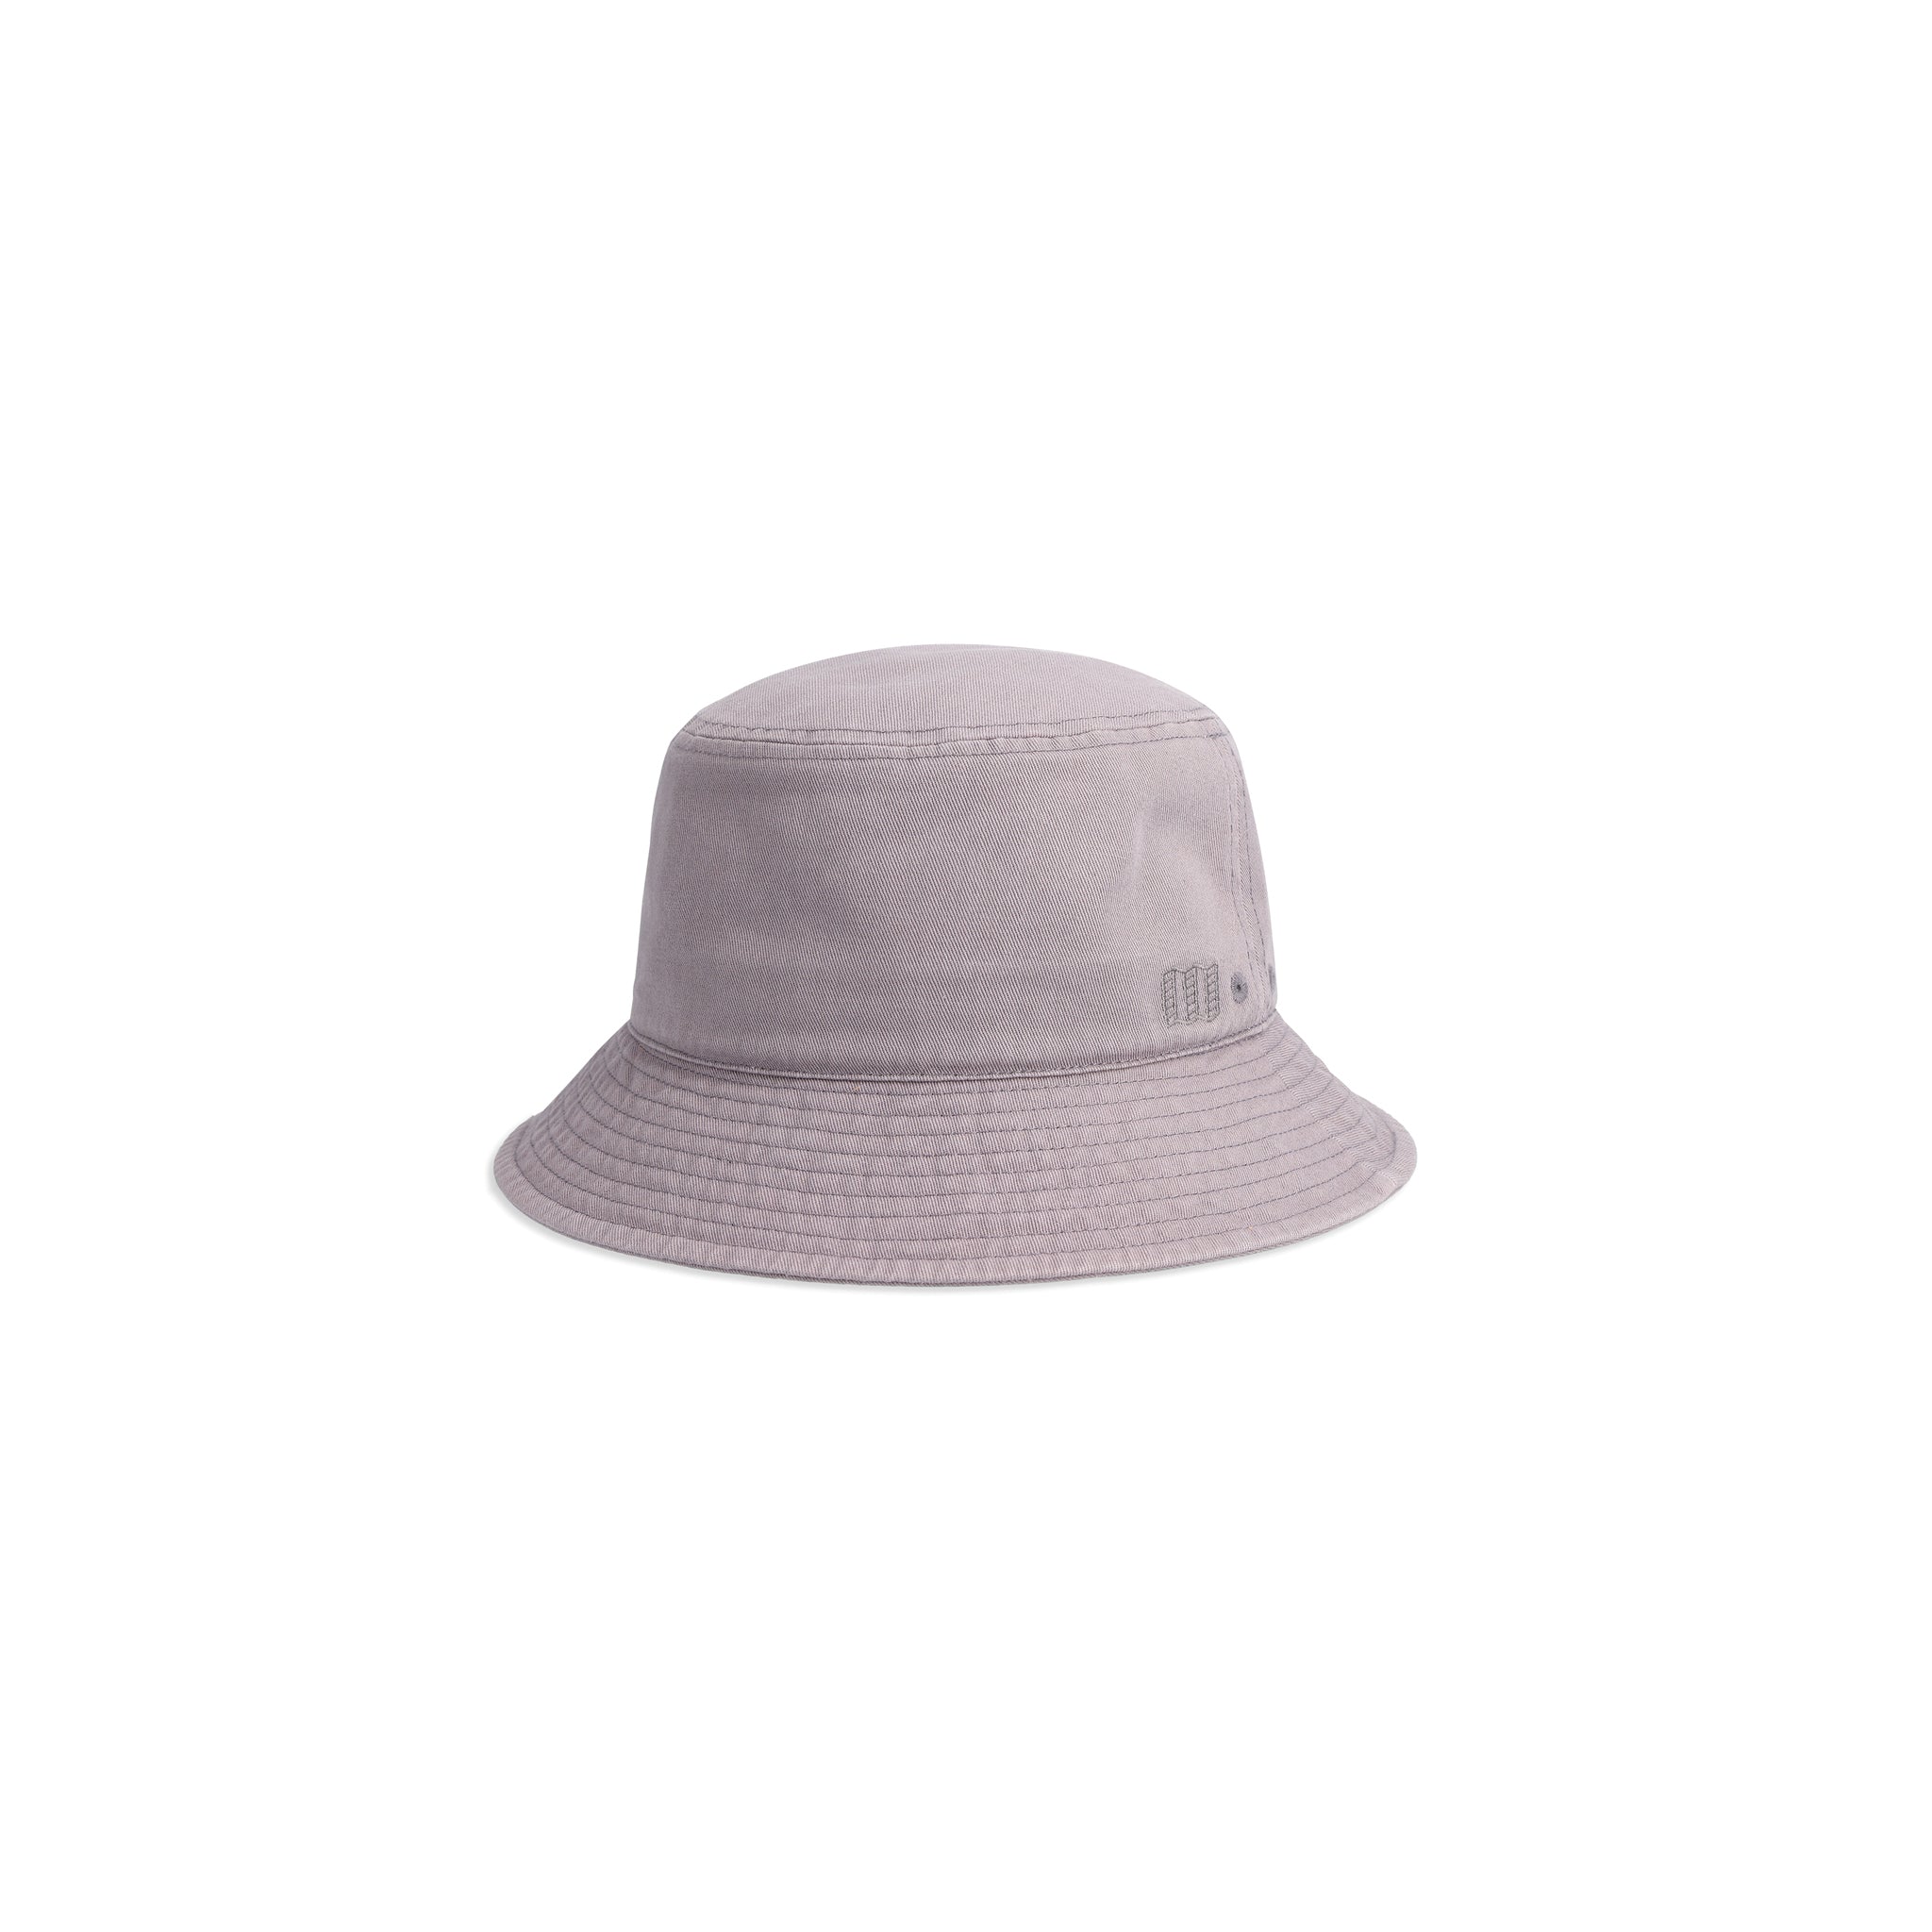 Front View of Topo Designs Dirt Bucket Hat in "Charcoal"